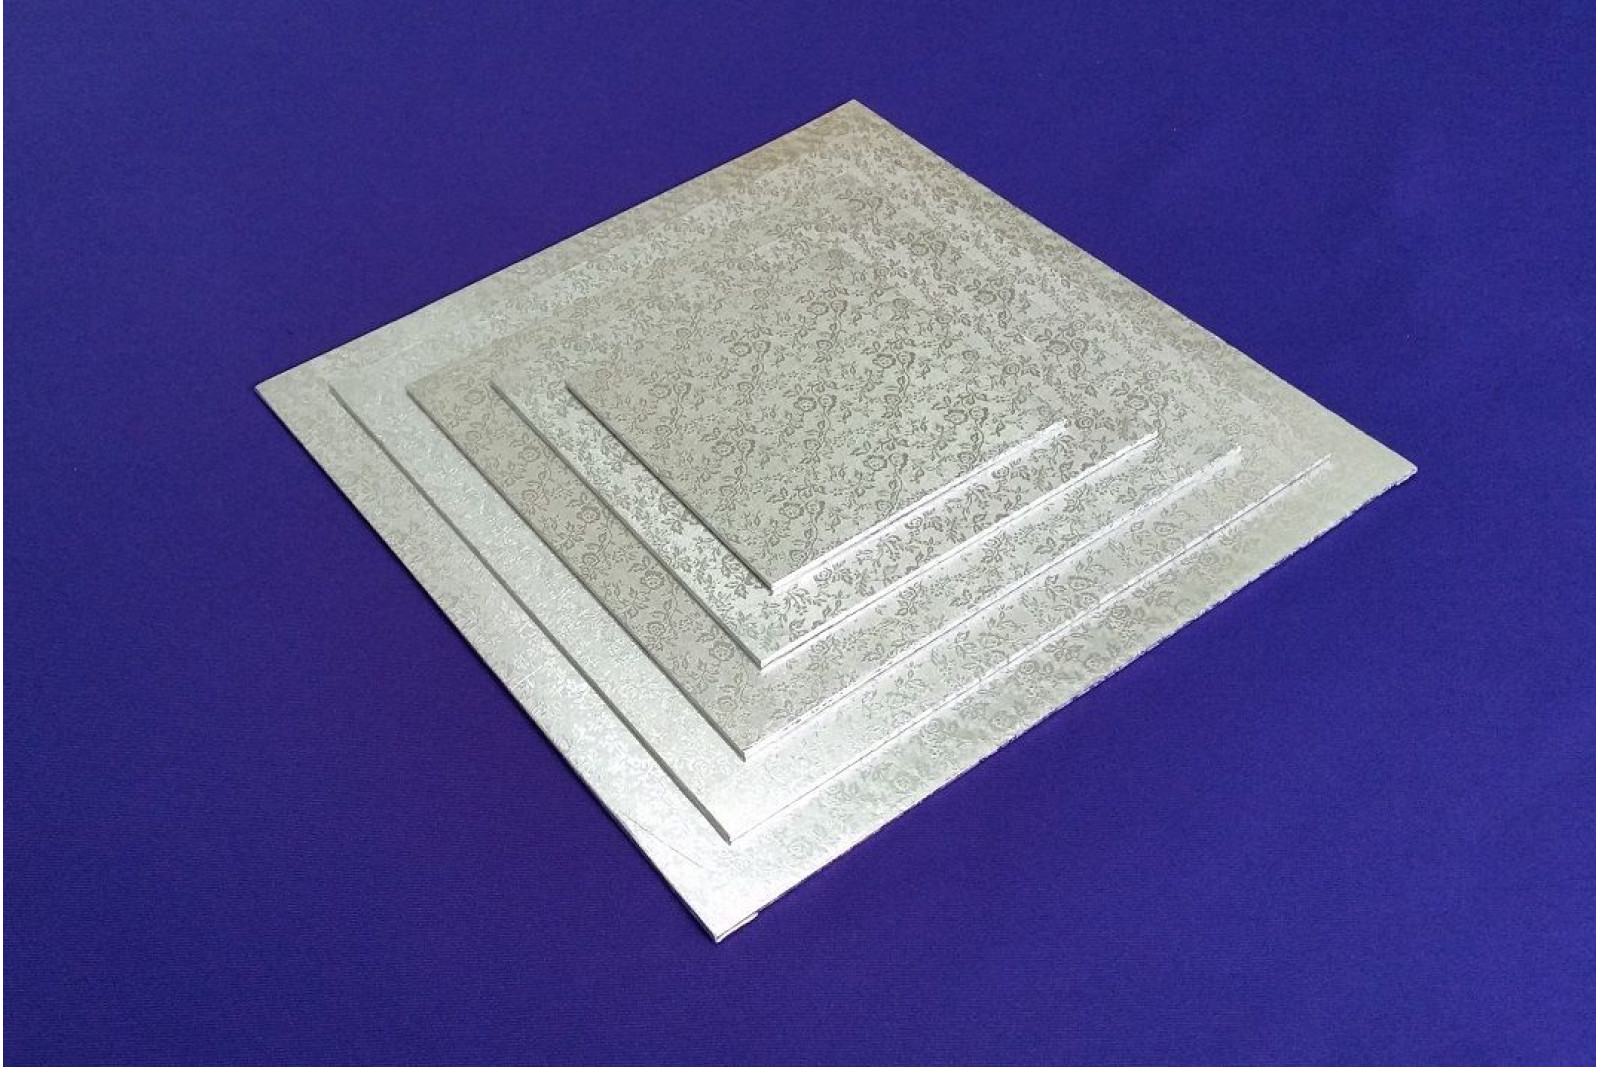 6 Inch | Silver | Square 3 mm | Cake Boards Masonite | Premium Quality | Great Christmas Bake Off